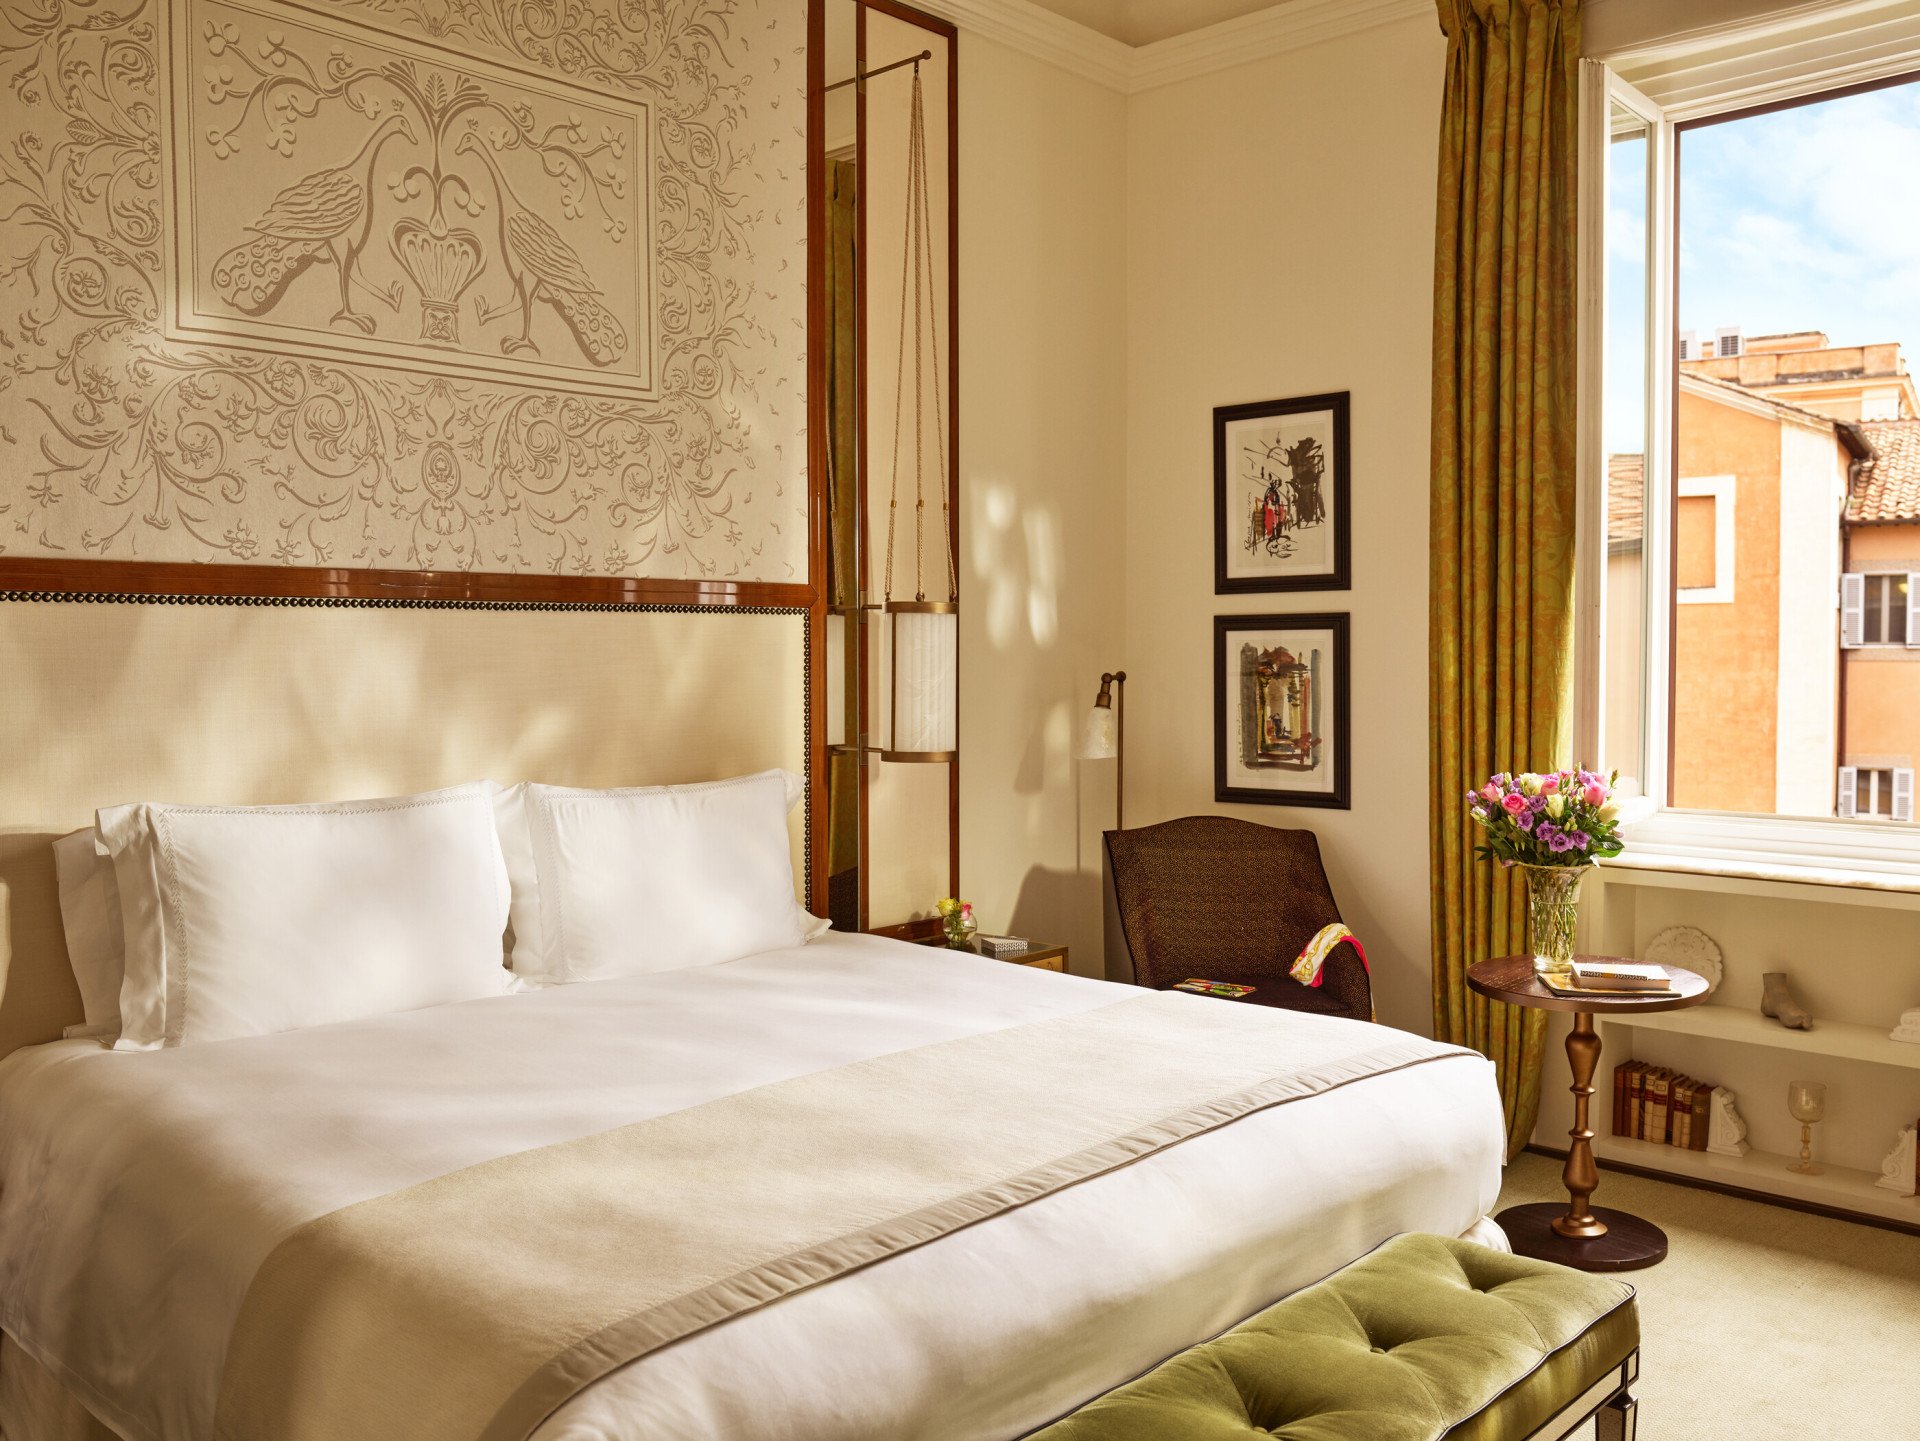 Rooms and suites at Hotel Eden | Dorchester Collection